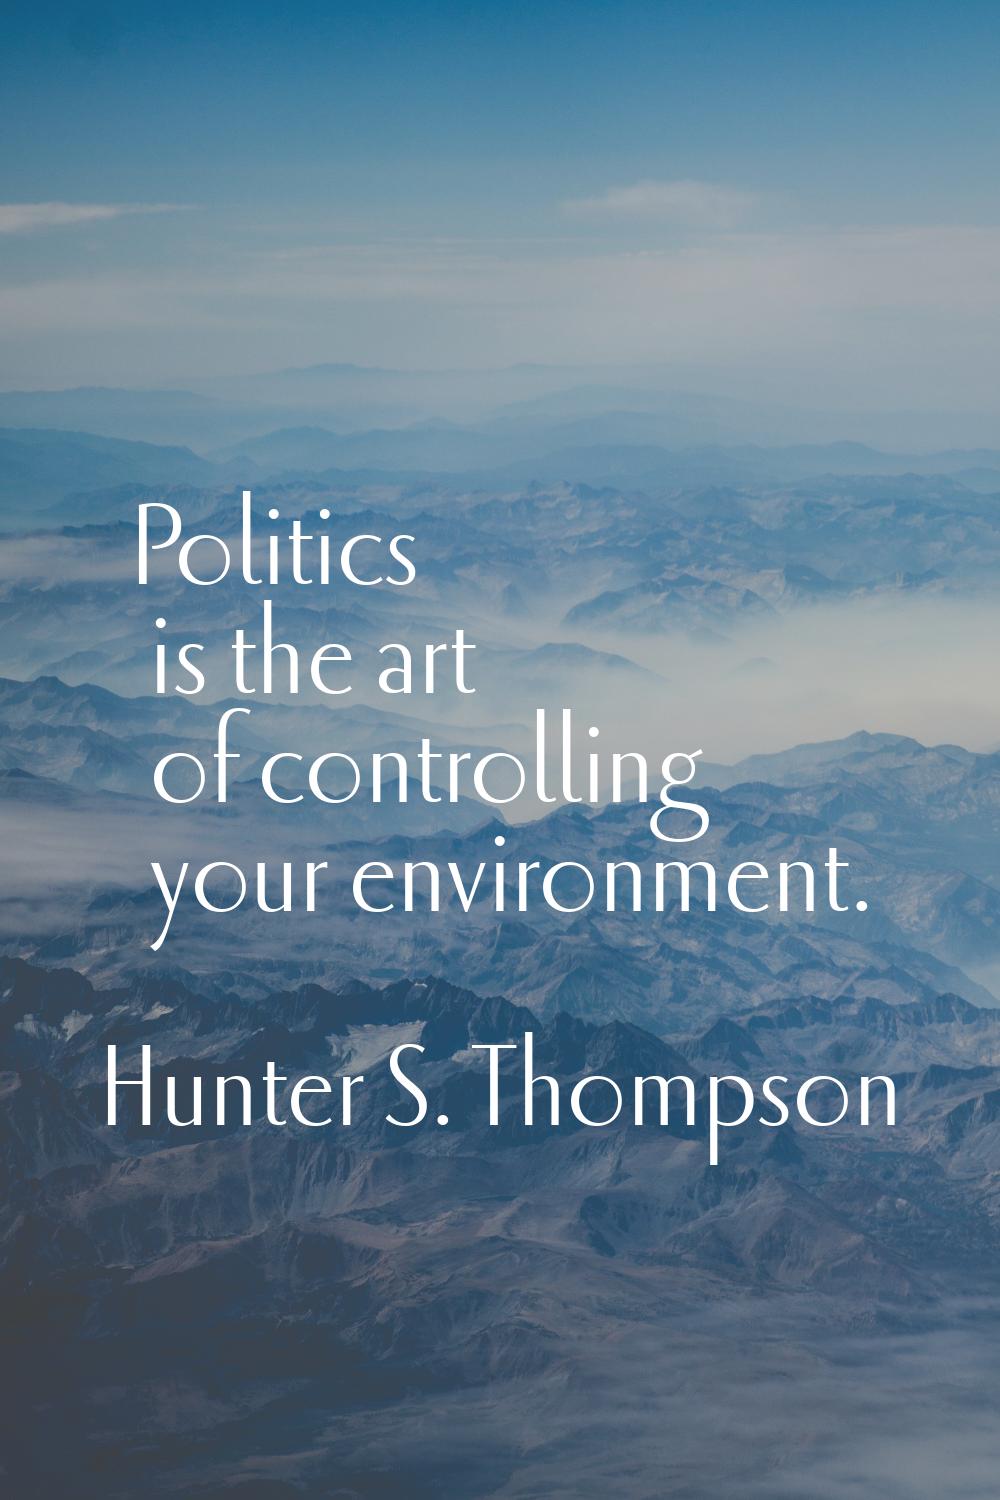 Politics is the art of controlling your environment.